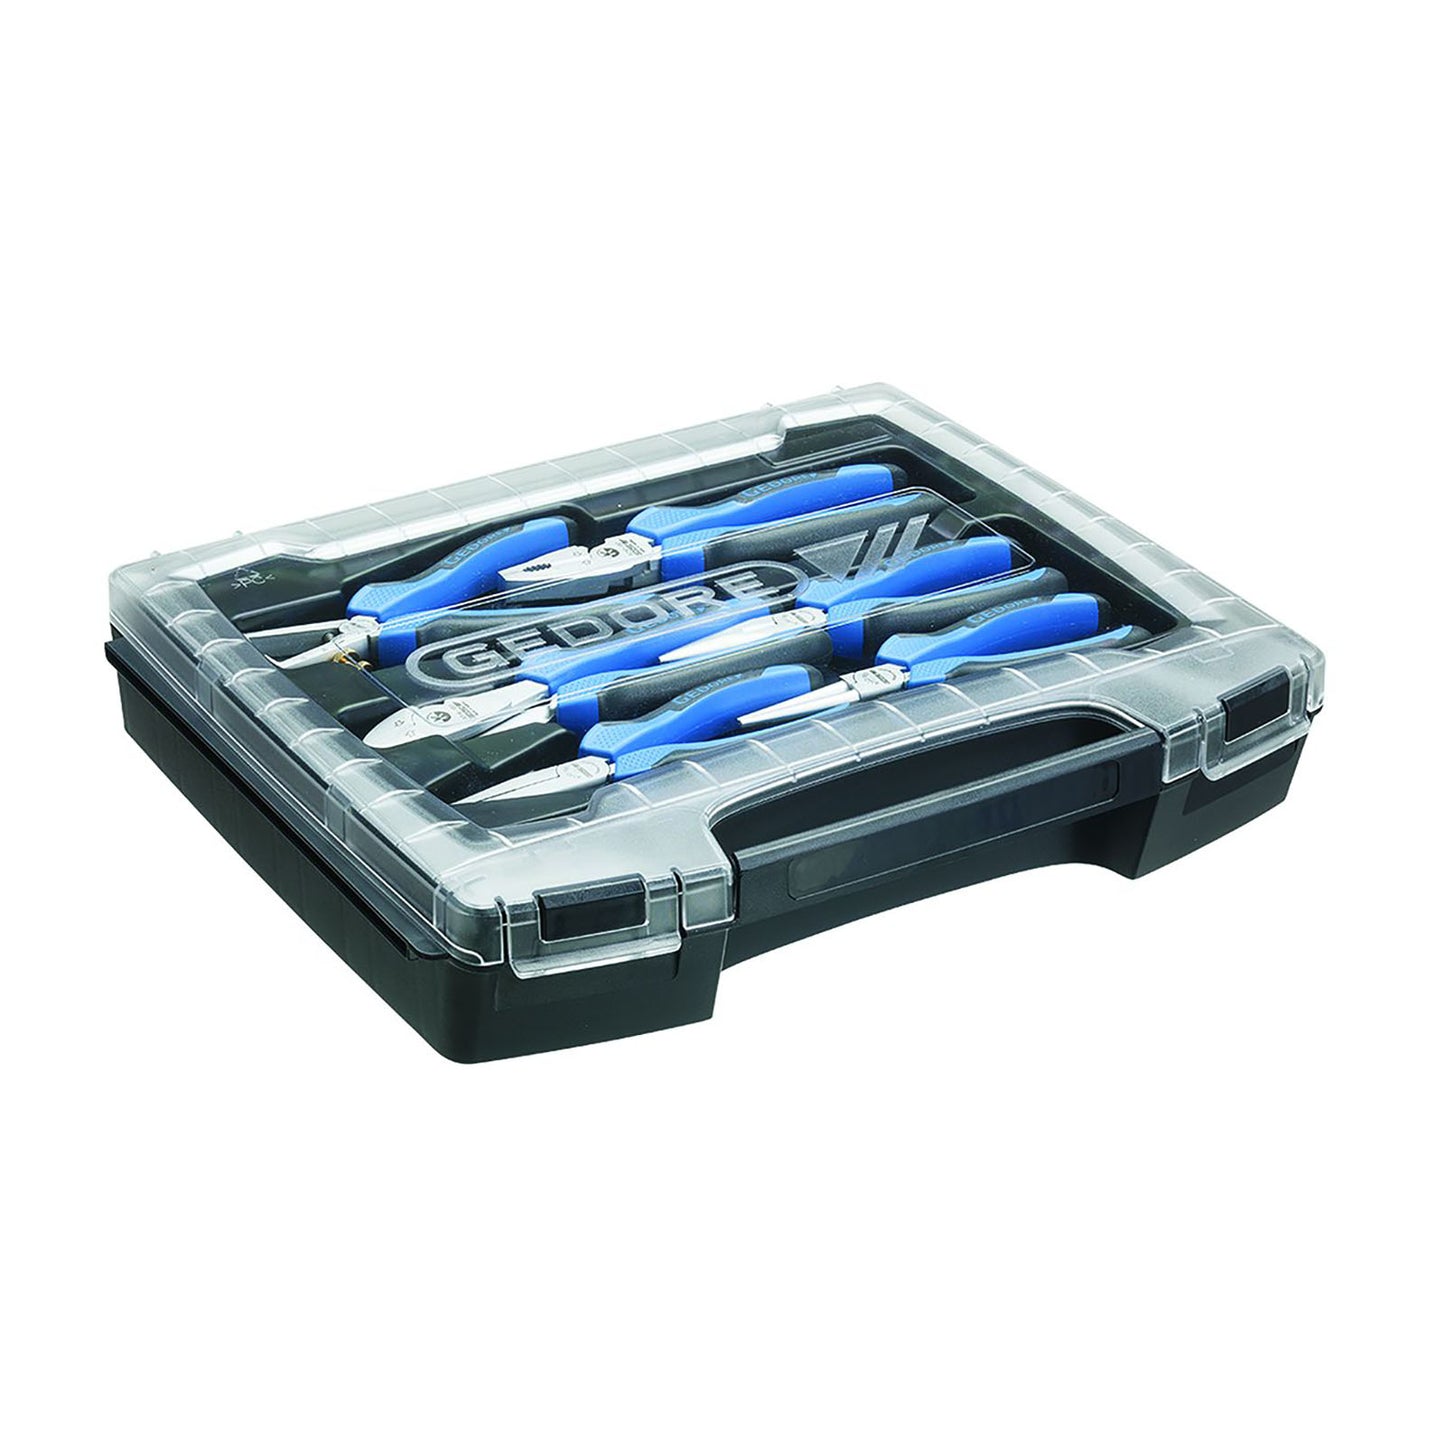 GEDORE 1101-002 - Assortment of Pliers in Briefcase (1708155)